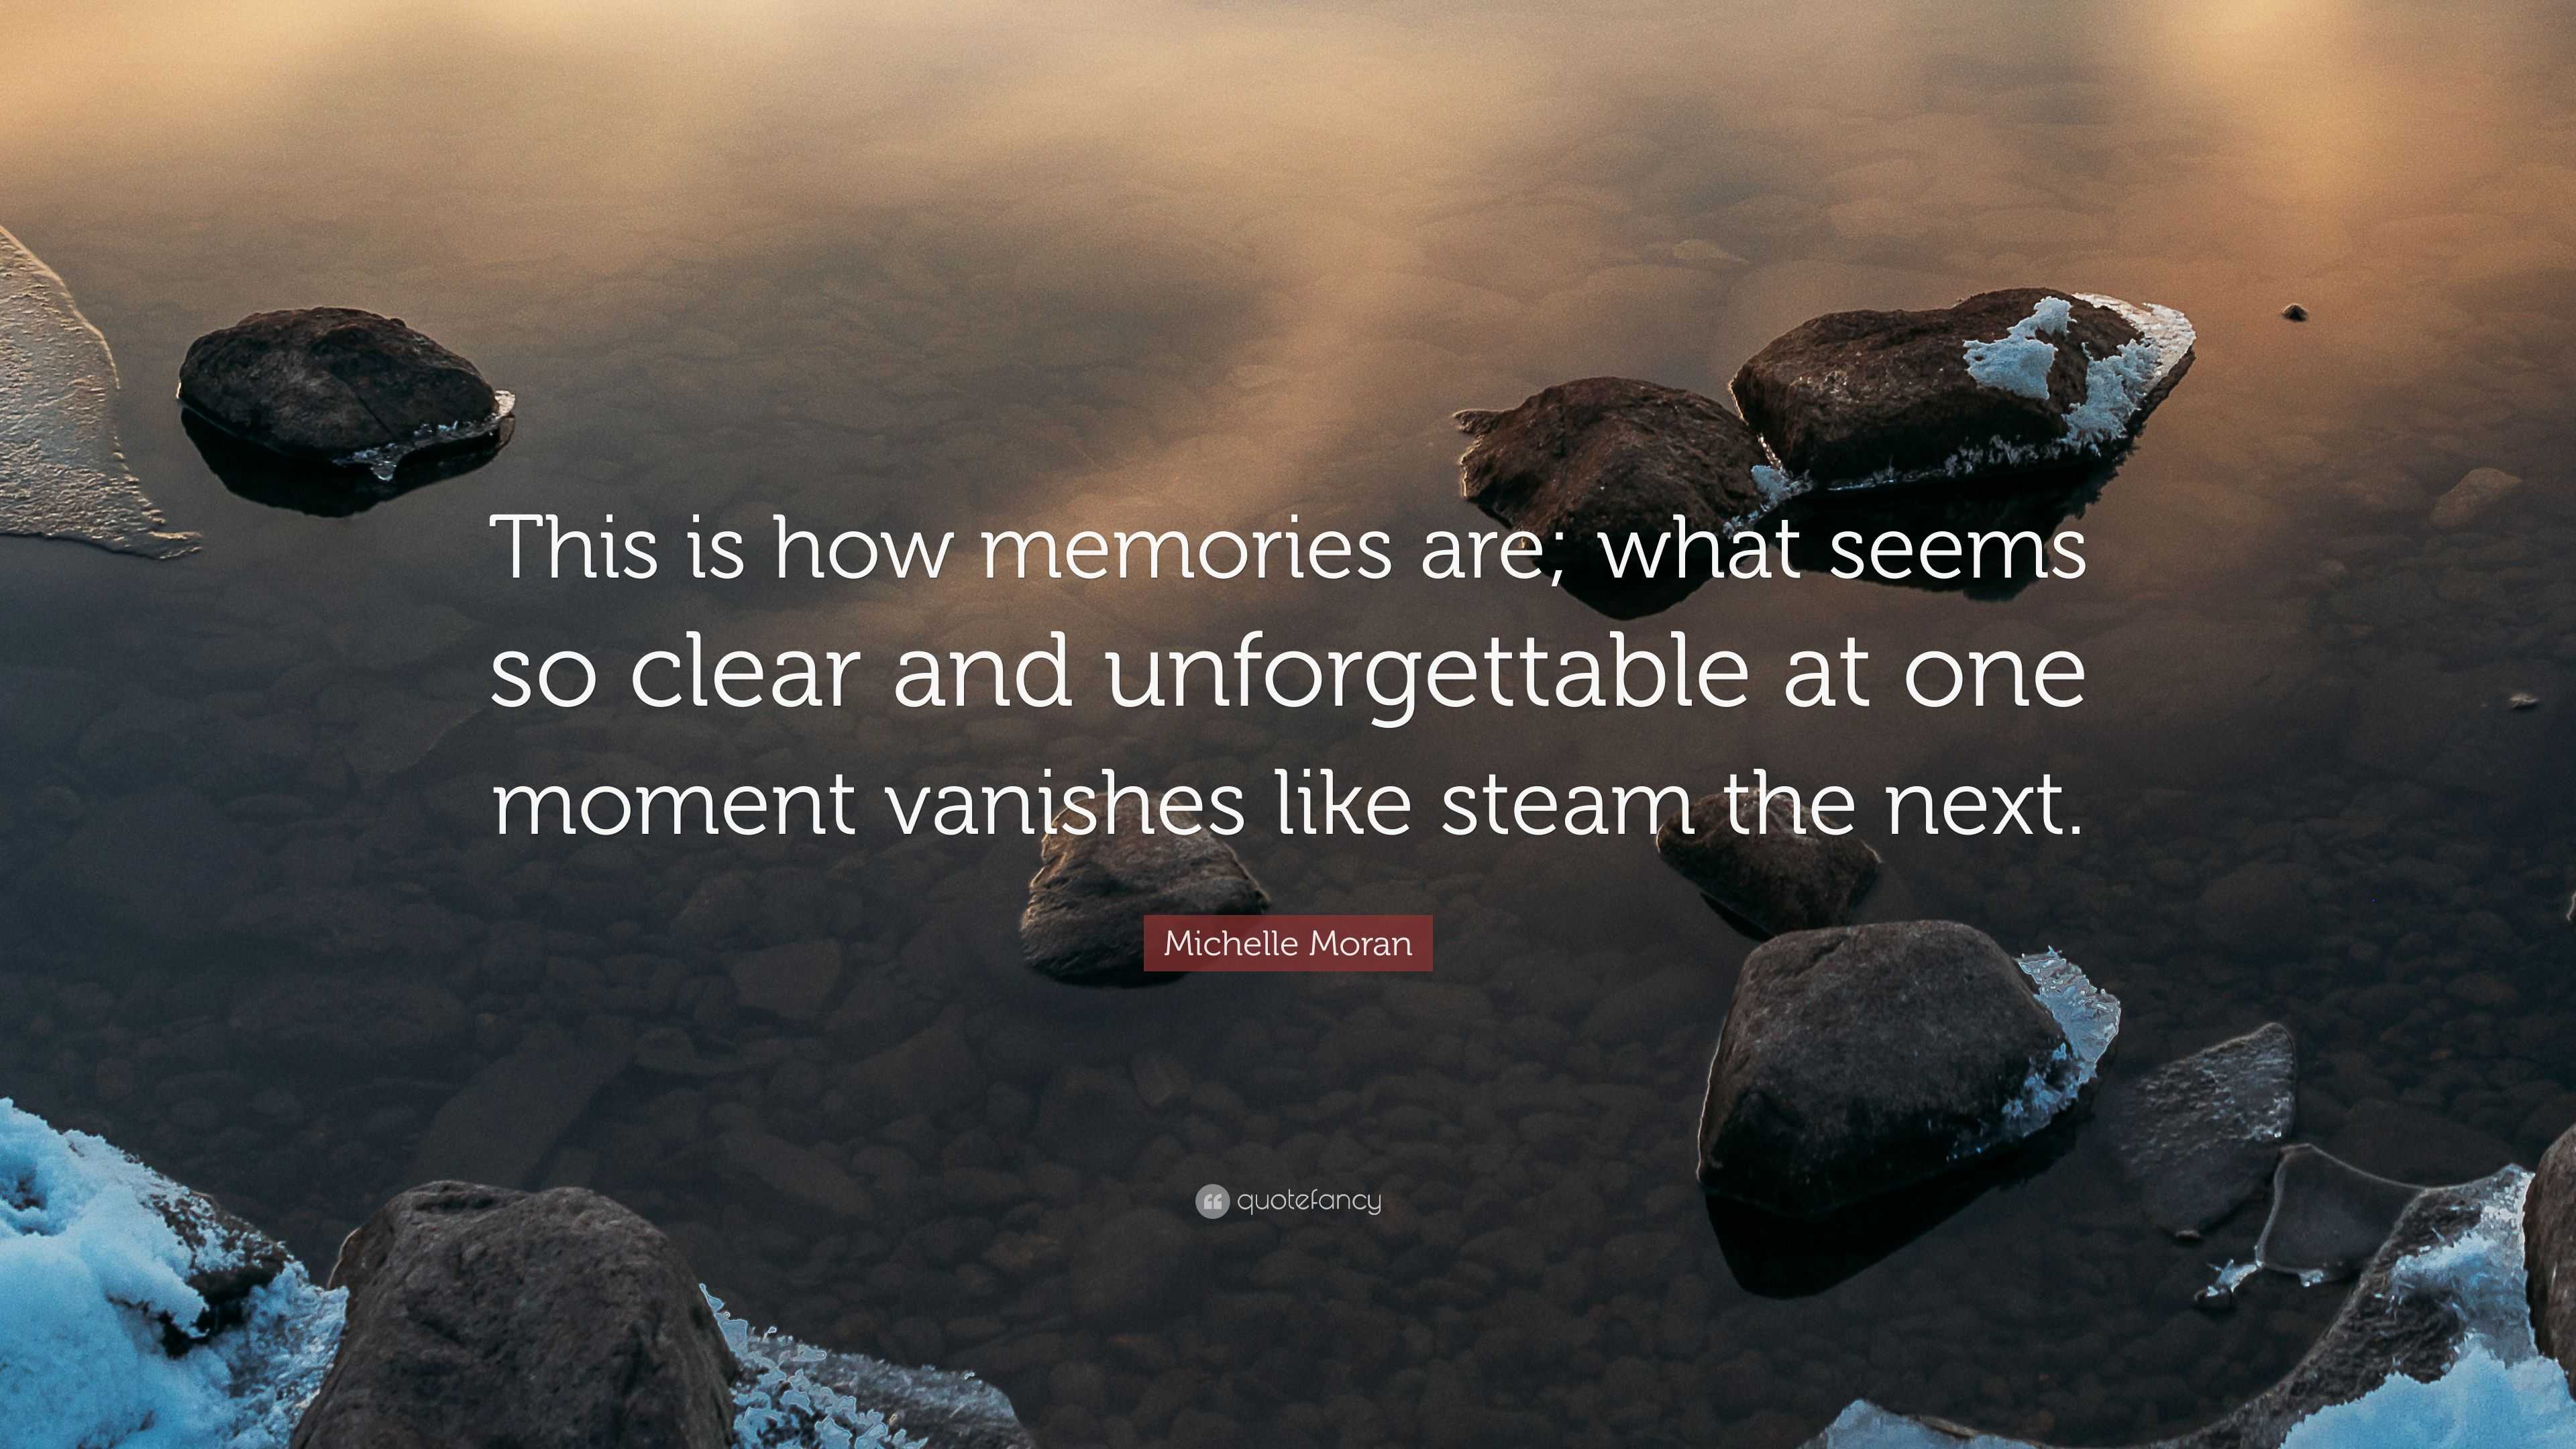 unforgettable memories quotes that are free to use